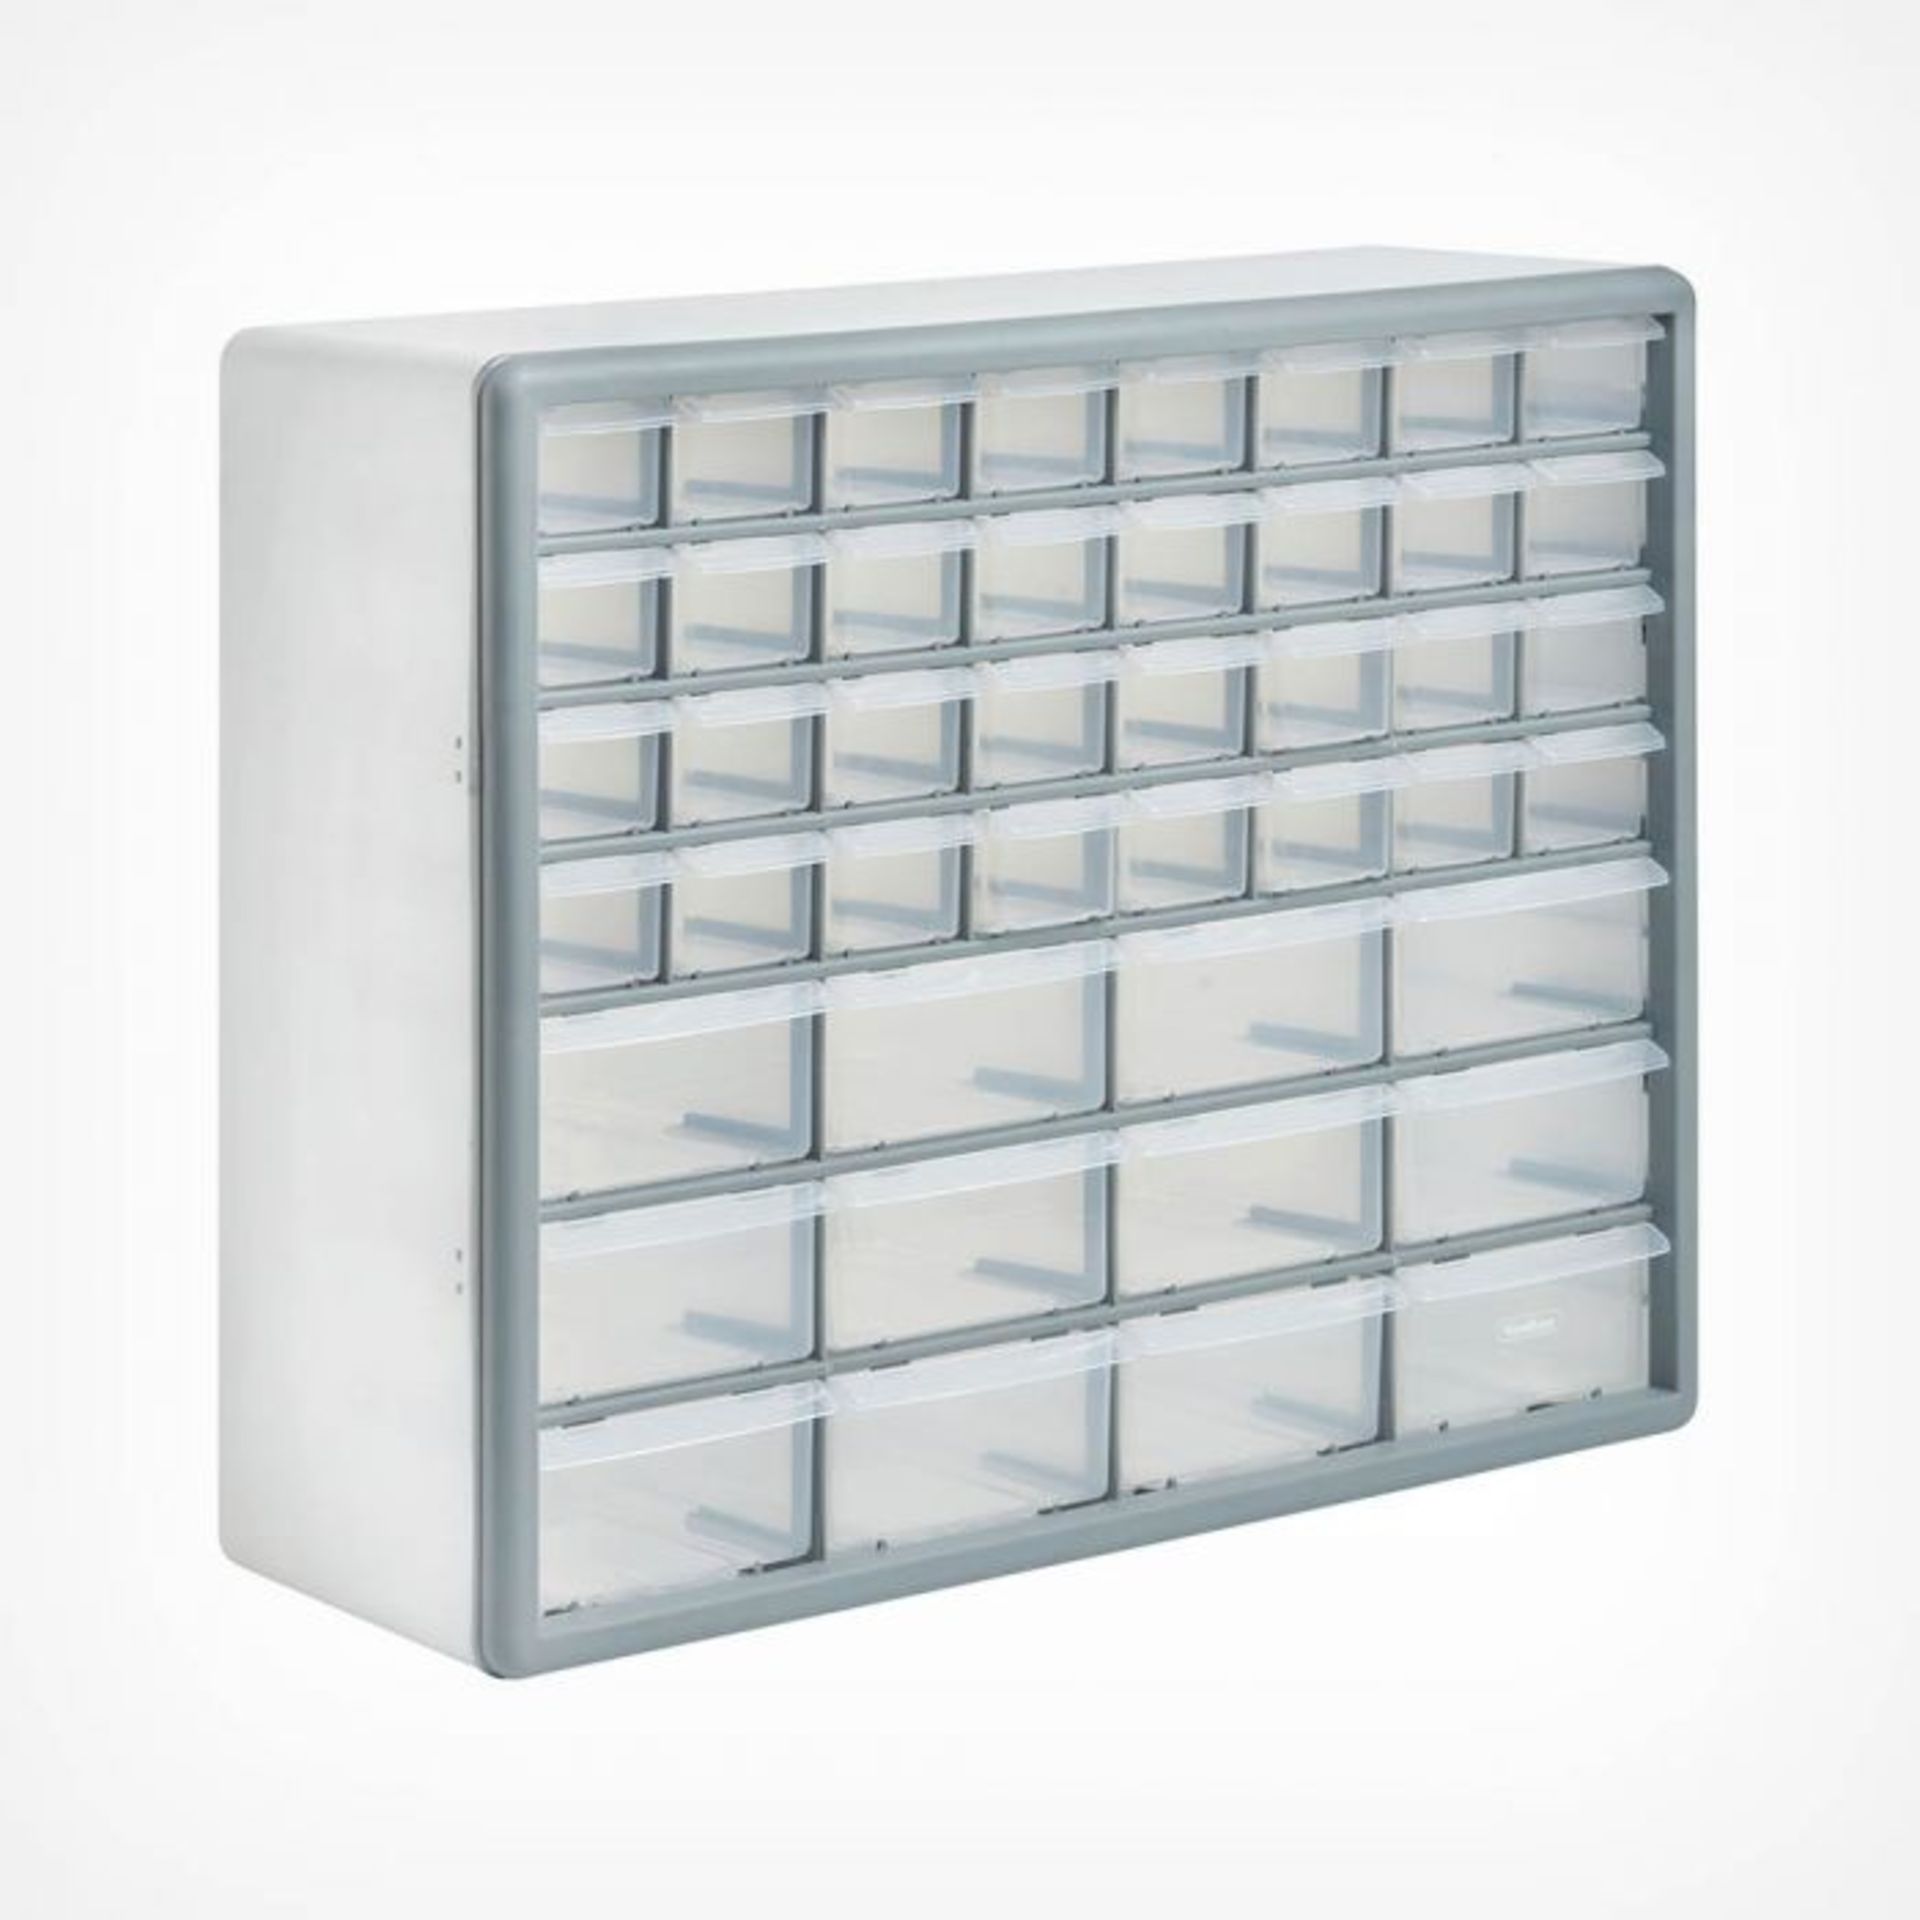 44 Drawer Storage Organiser - White. Bring some order to small parts storage with the luxury 44